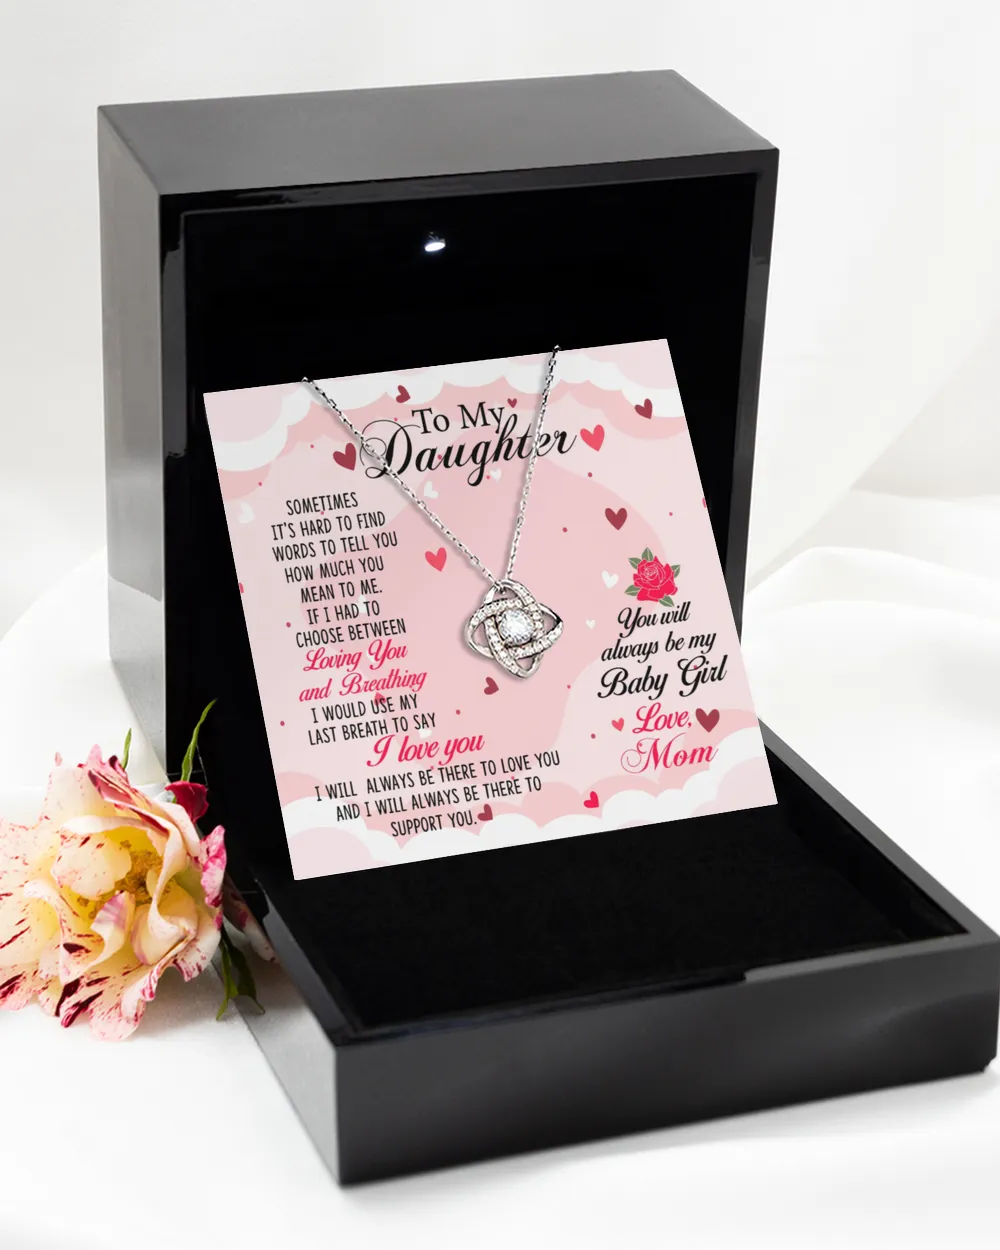 To My Daughter - Expressive Jewelry Gifts from Mom